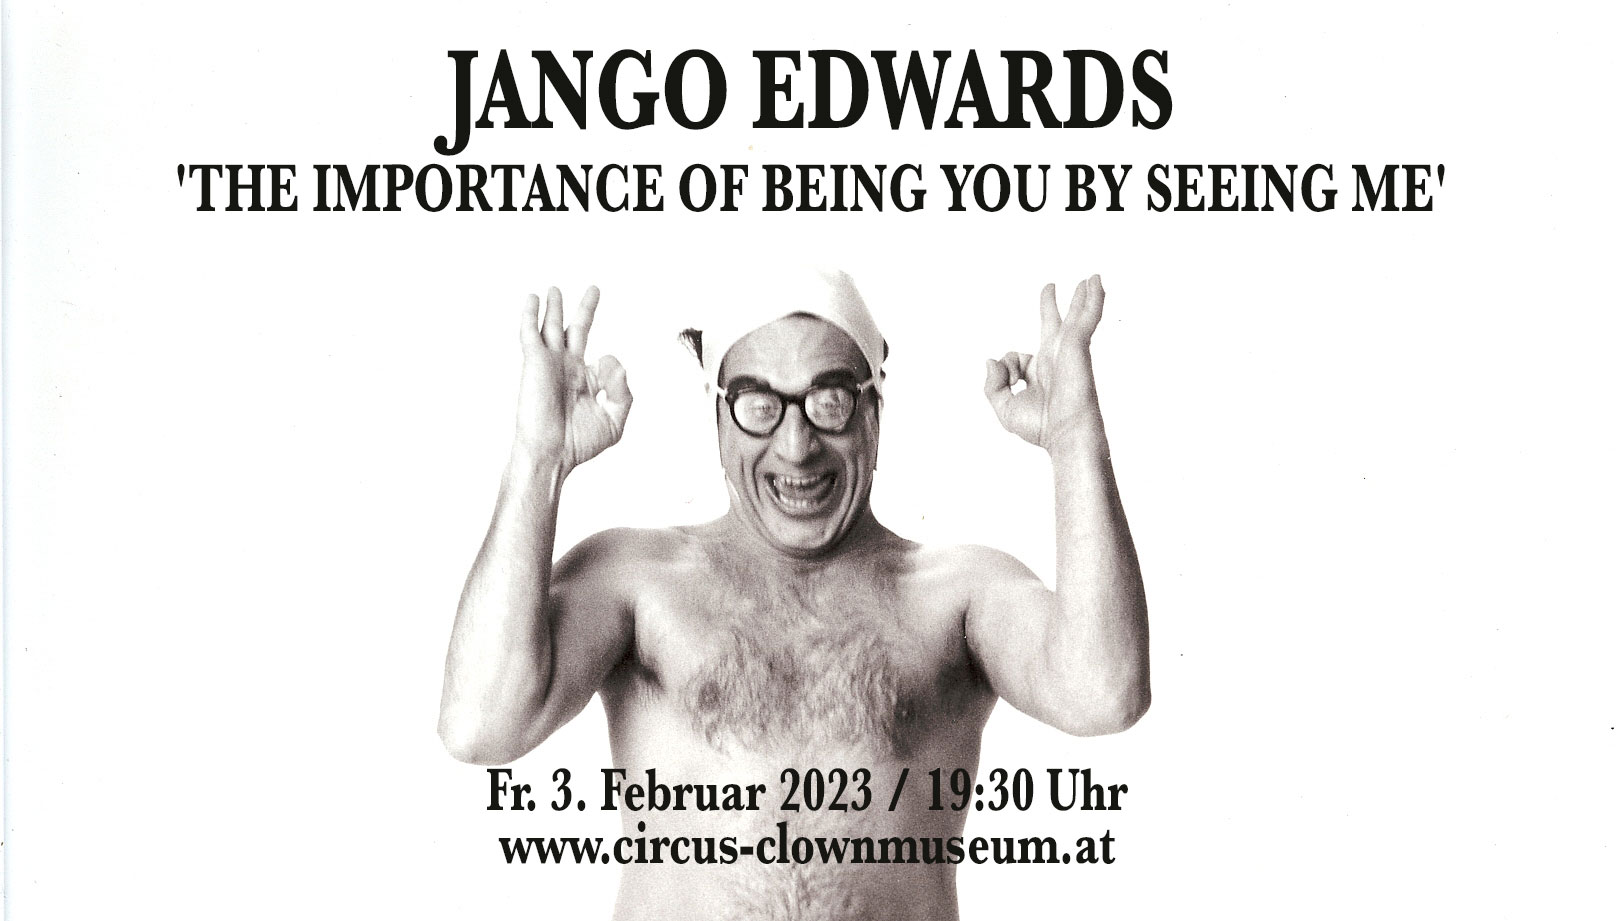 JANGO EDWARDS - 'THE IMPORTANCE OF BEING YOU BY SEEING ME'